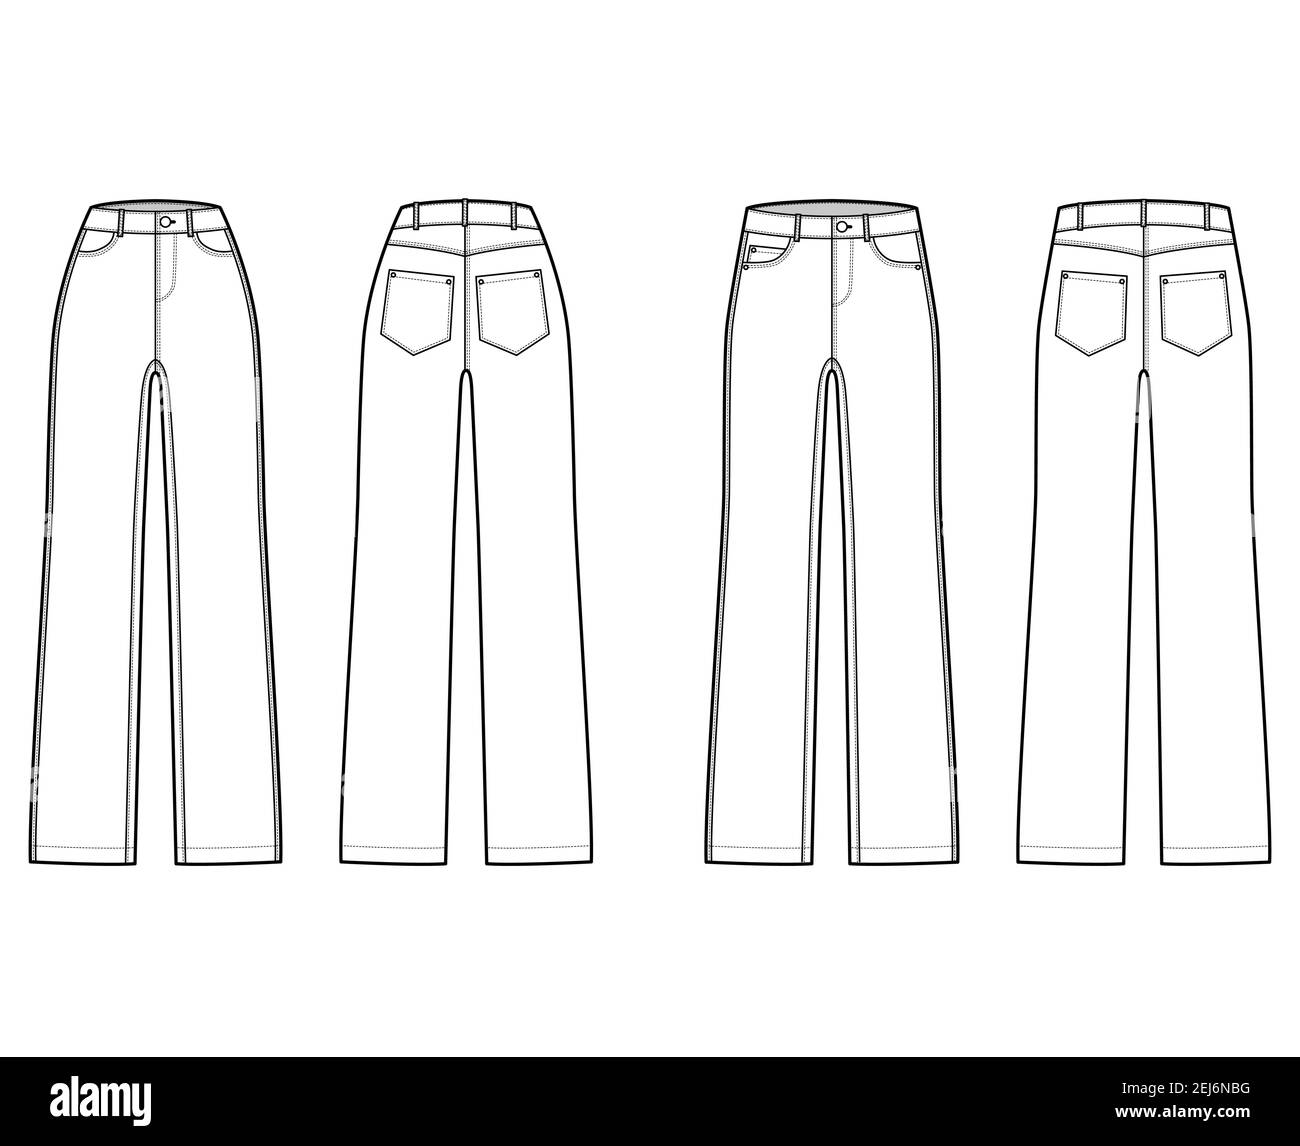 Set of Jeans Denim pants technical fashion illustration with full length,  normal low waist, high rise,